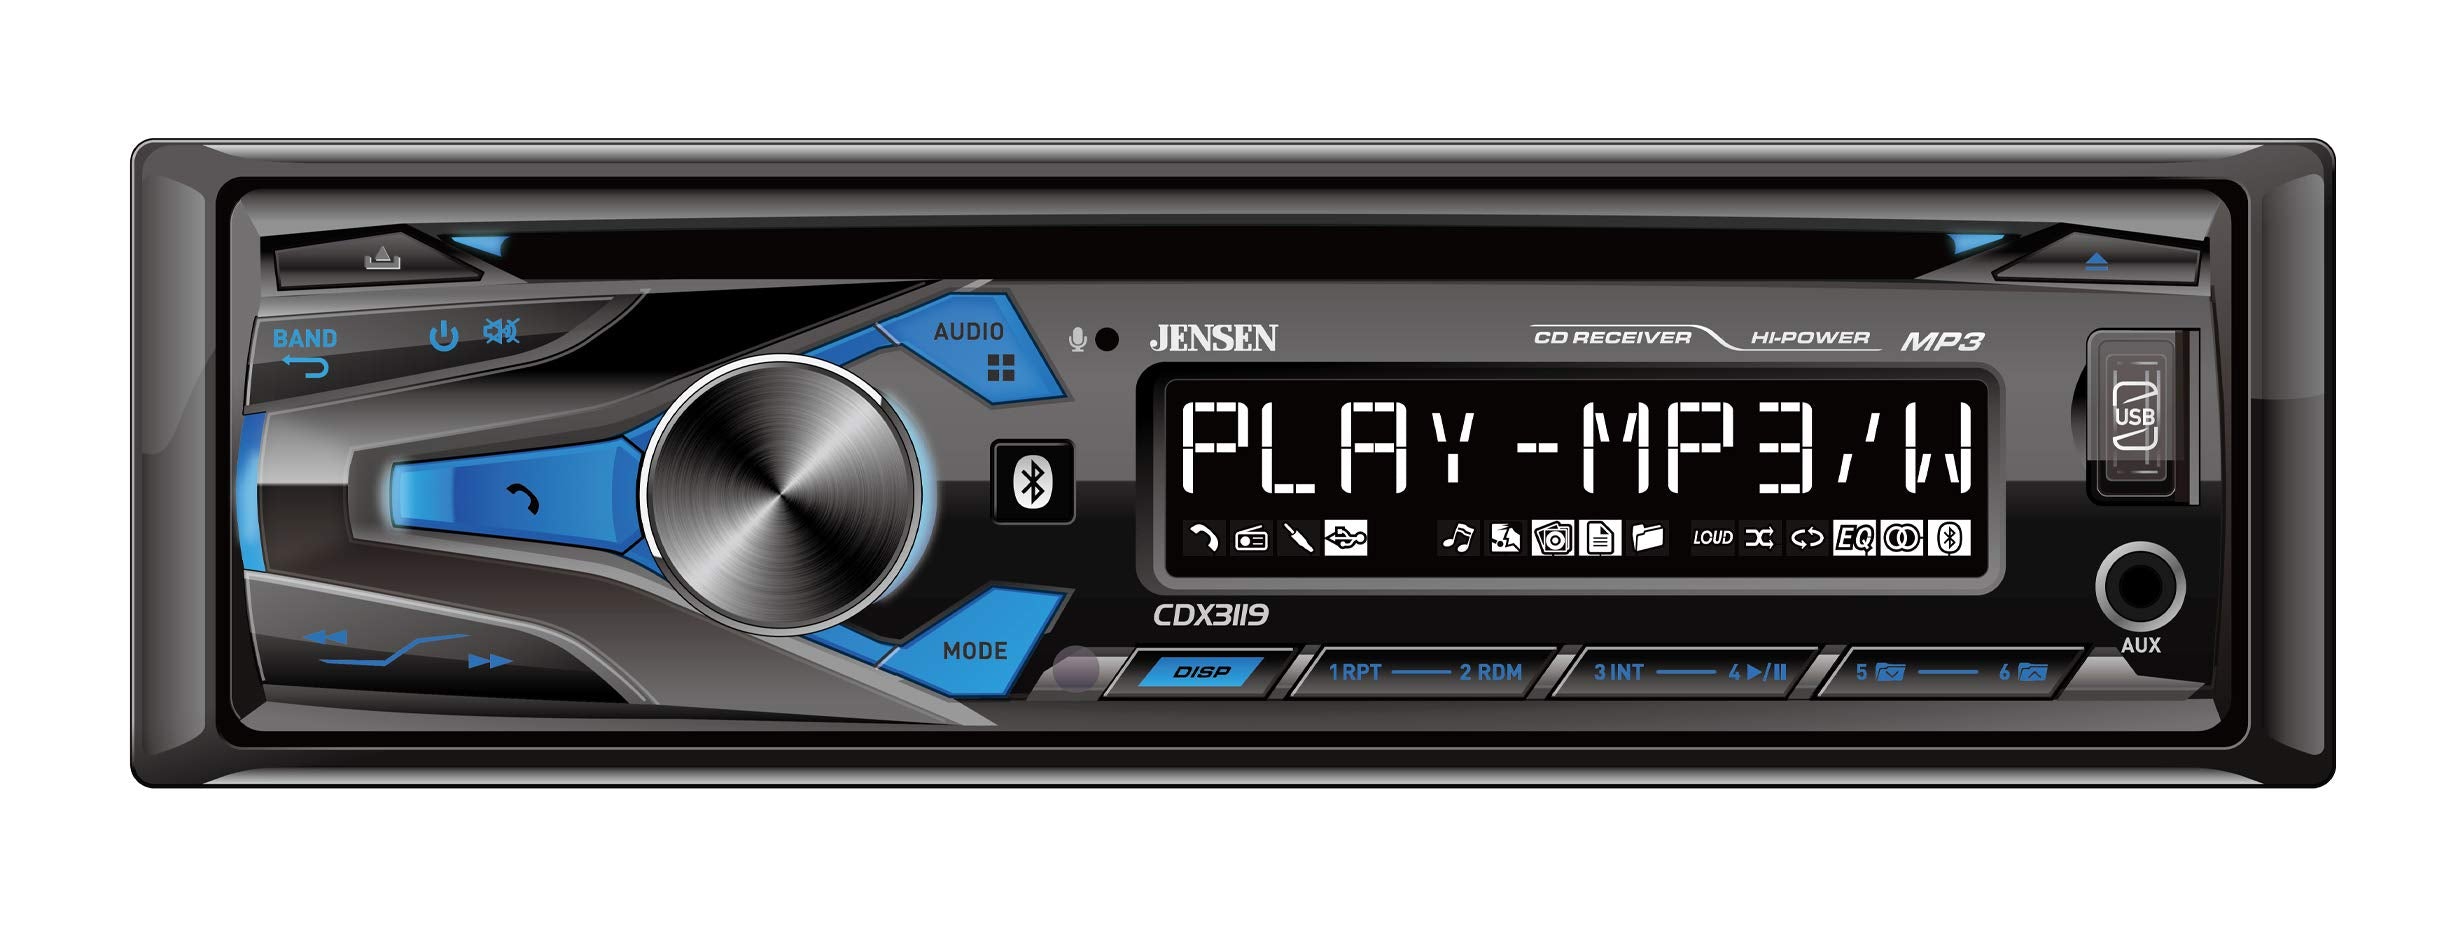 JENSEN CDX3119 10 Character LCD Single DIN Car Stereo Receiver, Bluetooth, USB Charging, Front AUX Input  - Like New